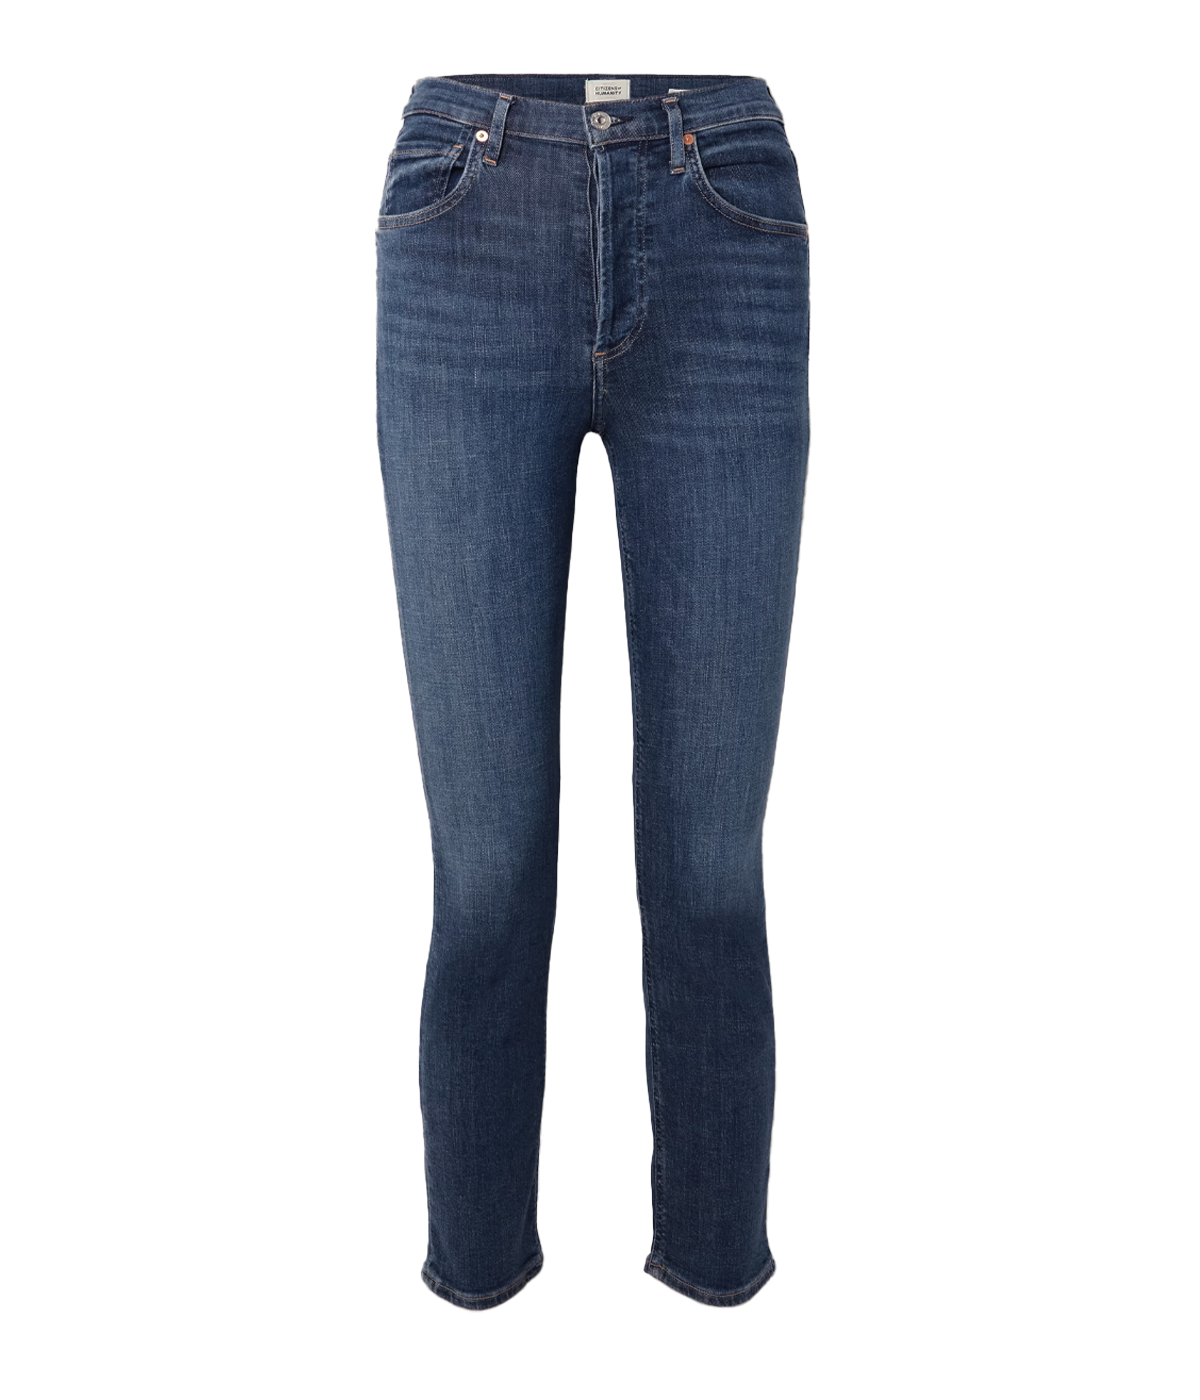 Image of a high-rise and slim-leg dark denim wash jean, with vintage inspired whiskering, cuffed hem, button and zip closure and gold hardware.